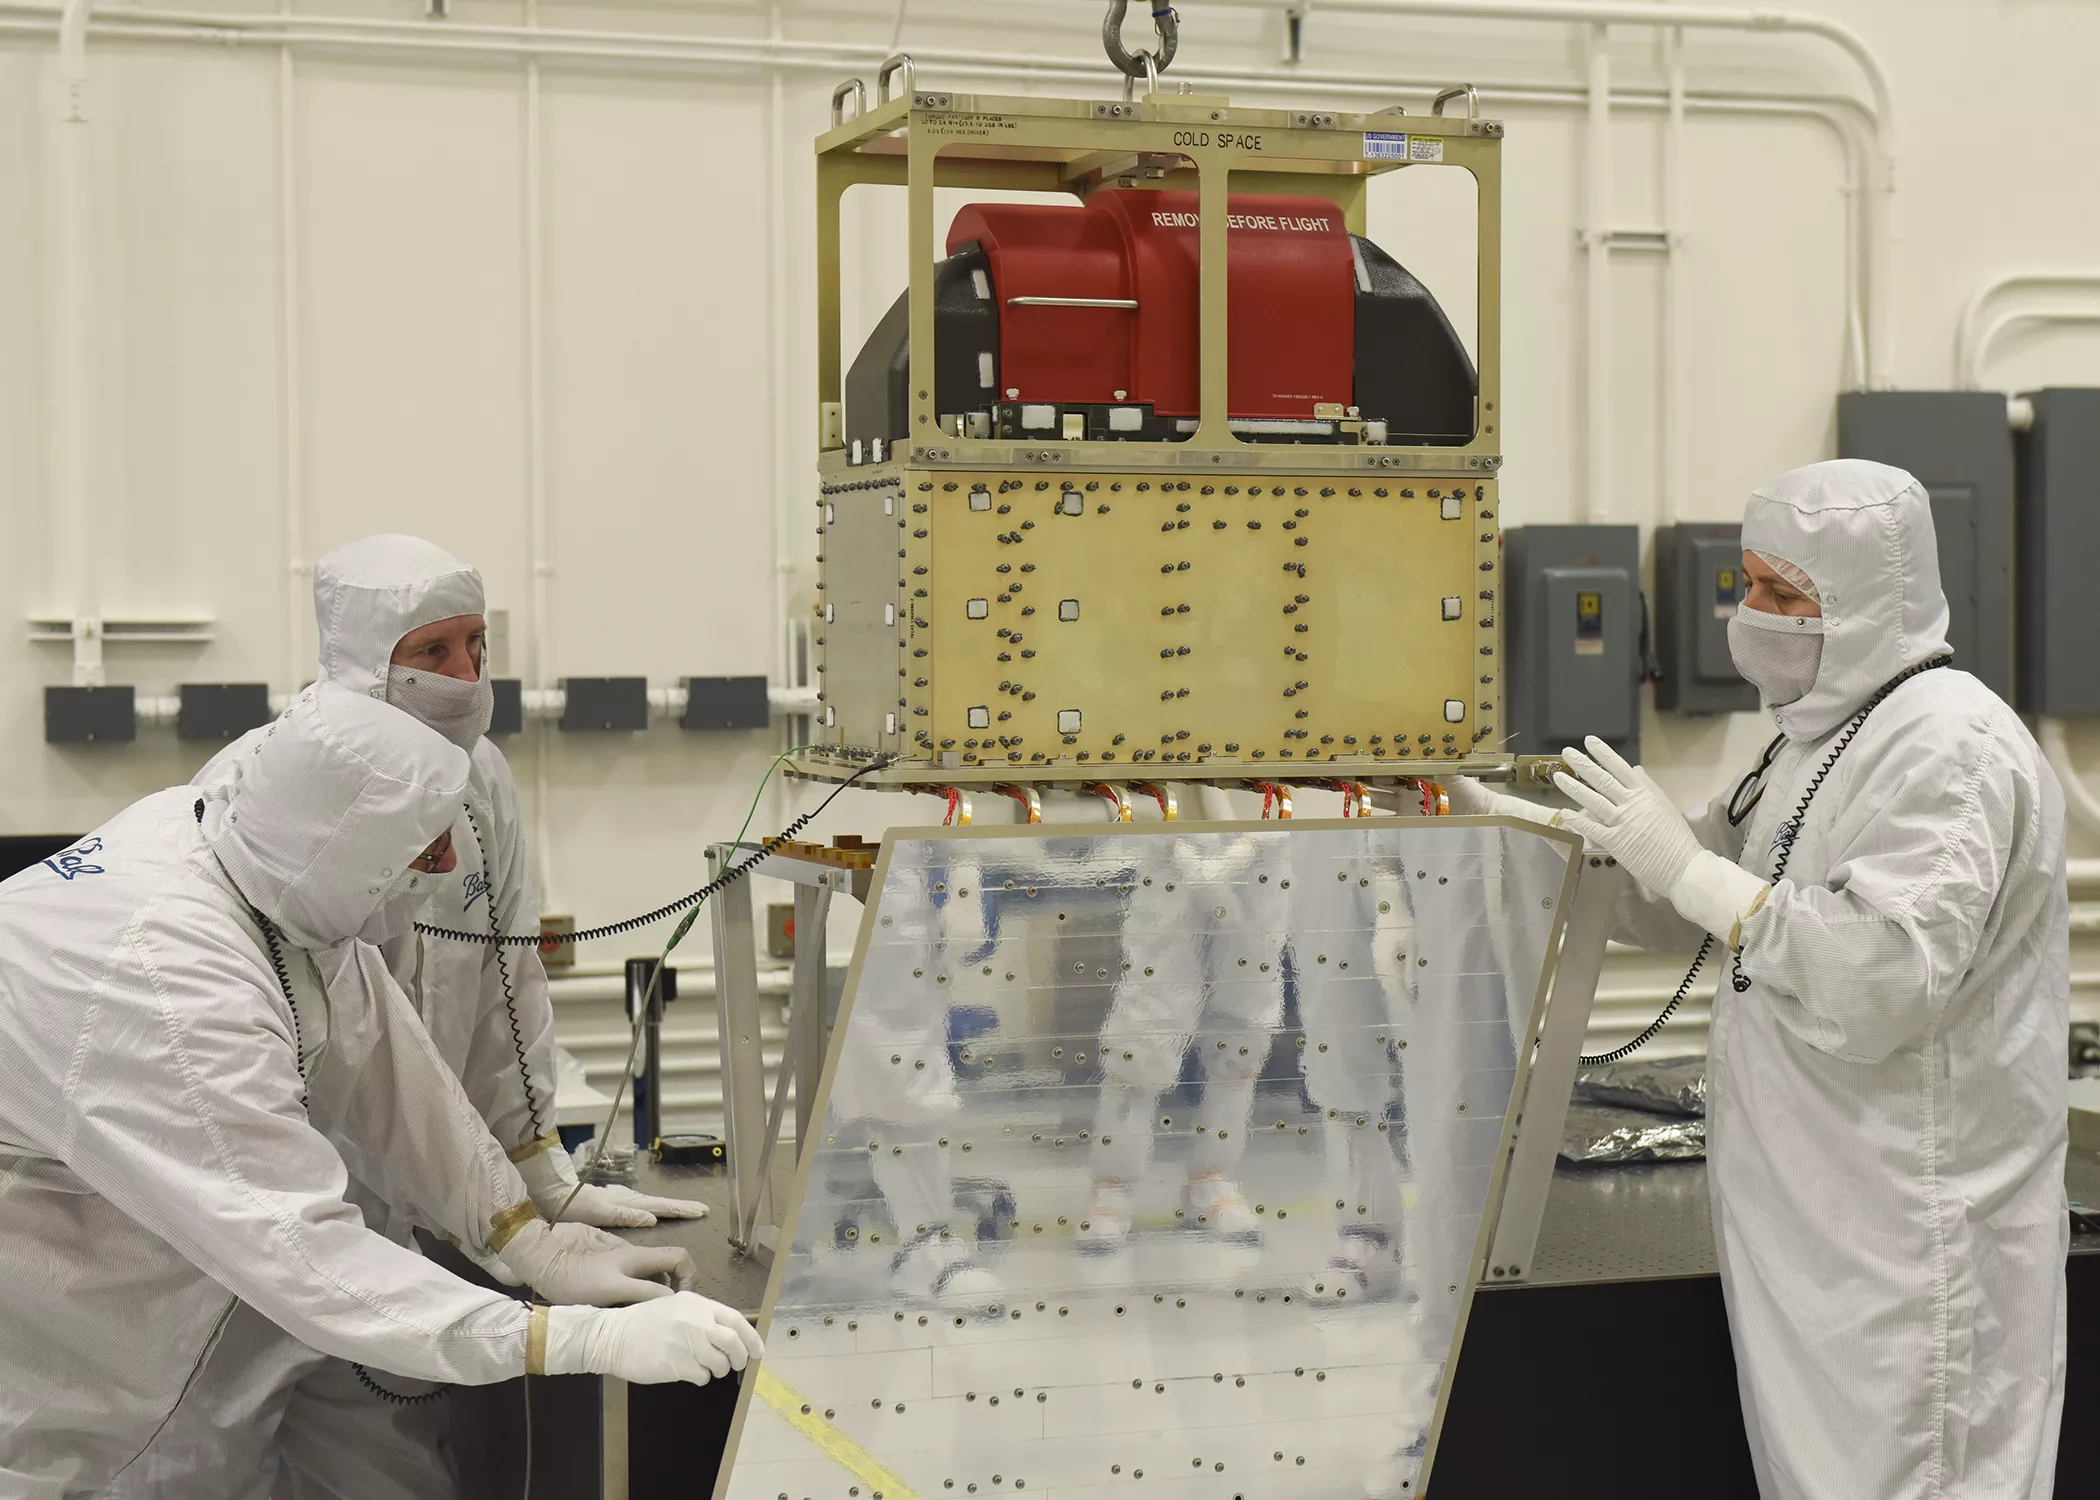 Image of JPSS-1 mounted with instruments